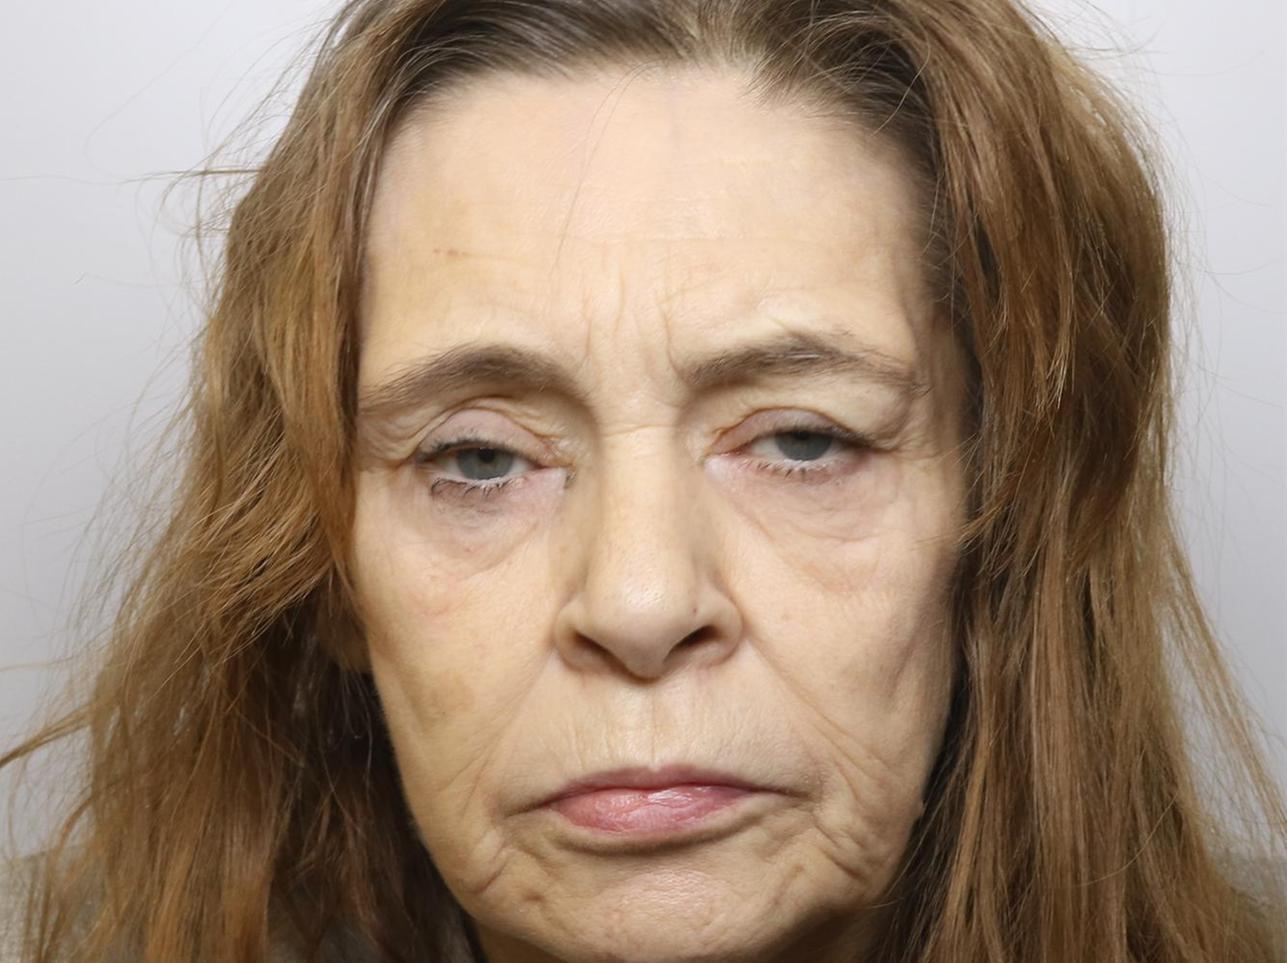 Christine Gavin was locked up for 16-months for pickpocketing crime spree in Leeds